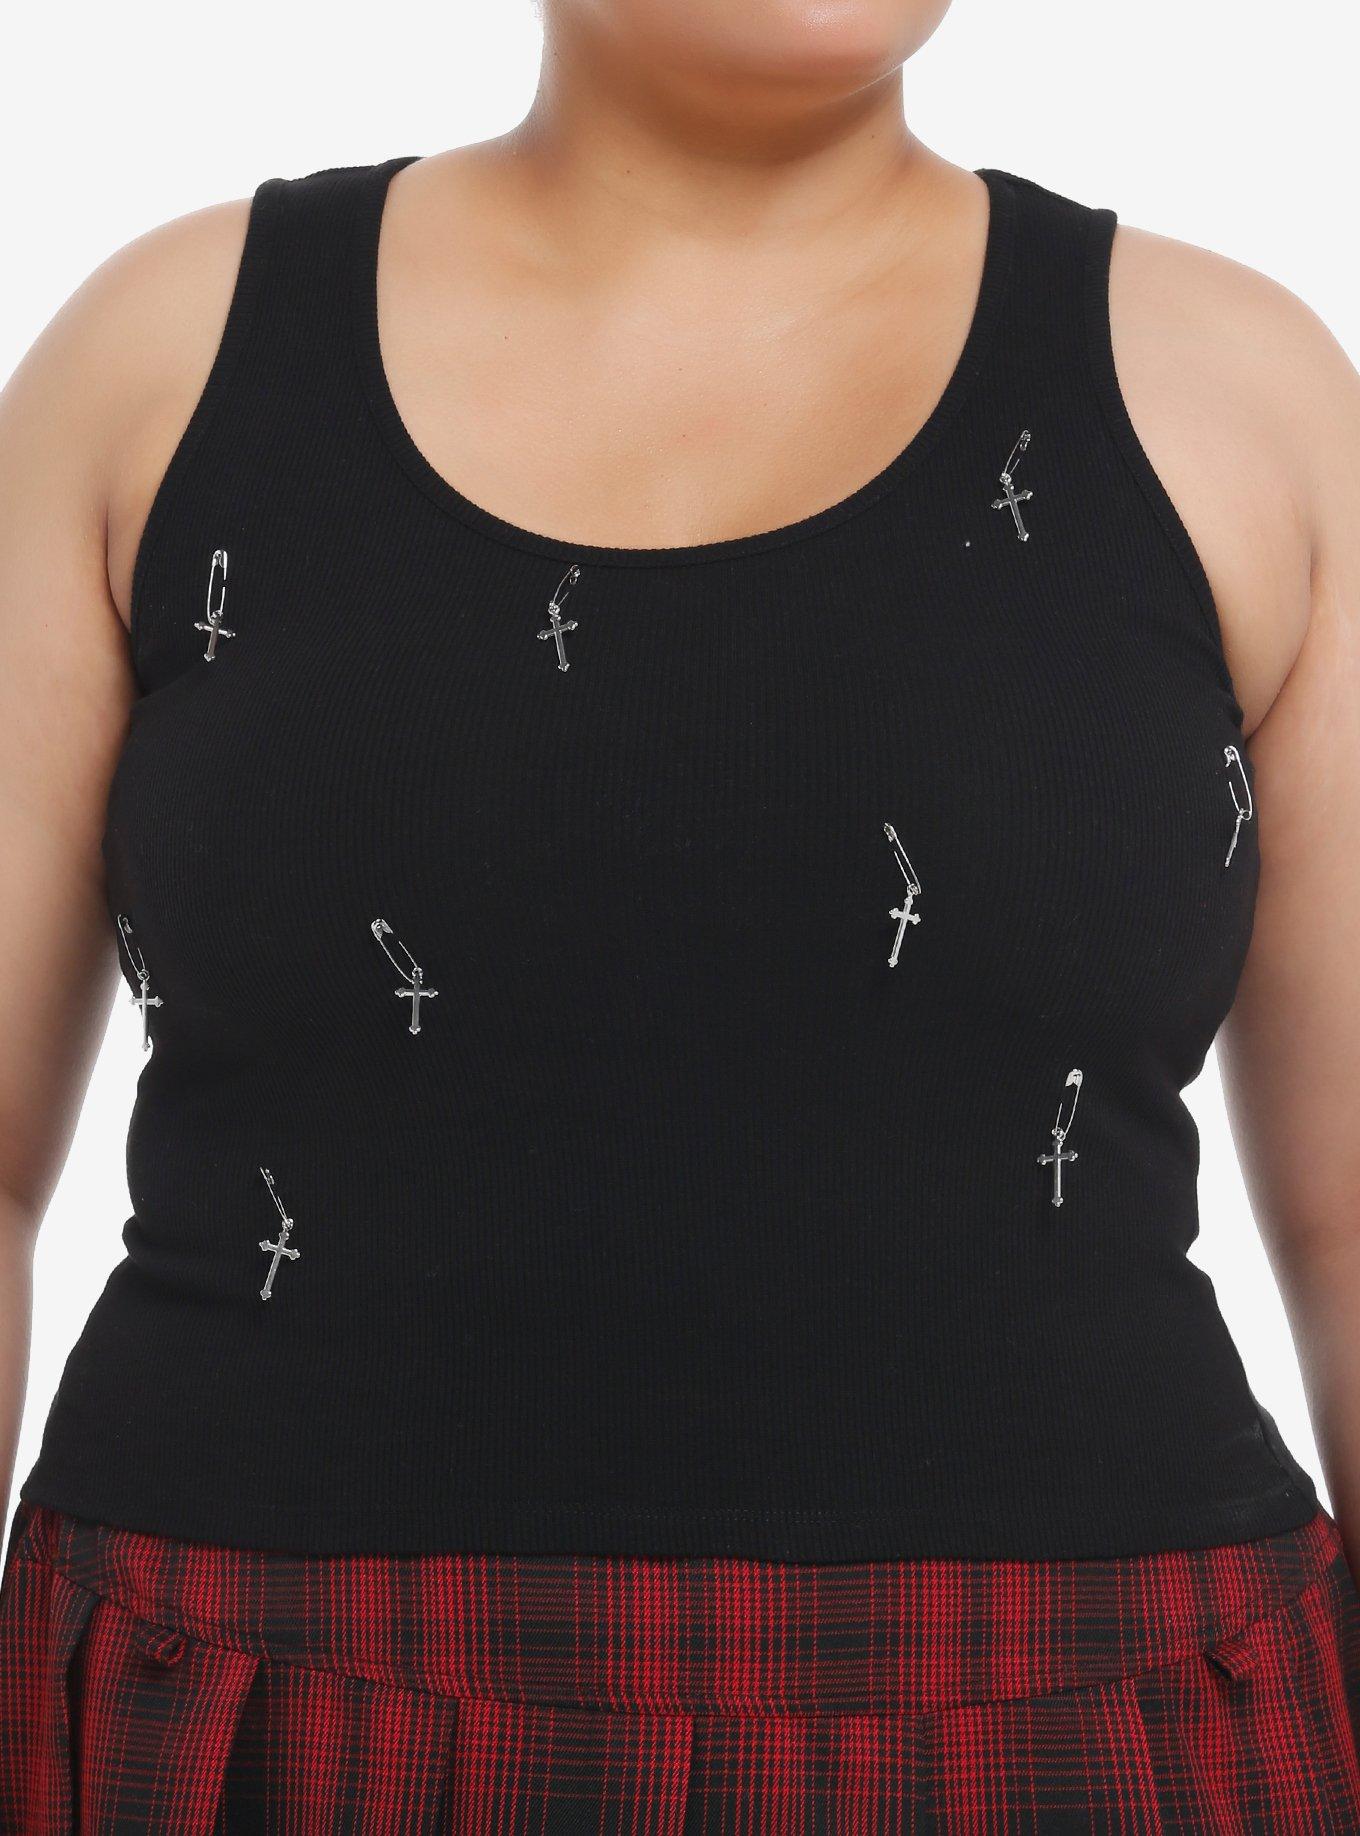 Social Collision Safety Pin Cross Charm Girls Tank Top Plus Size, SILVER, hi-res